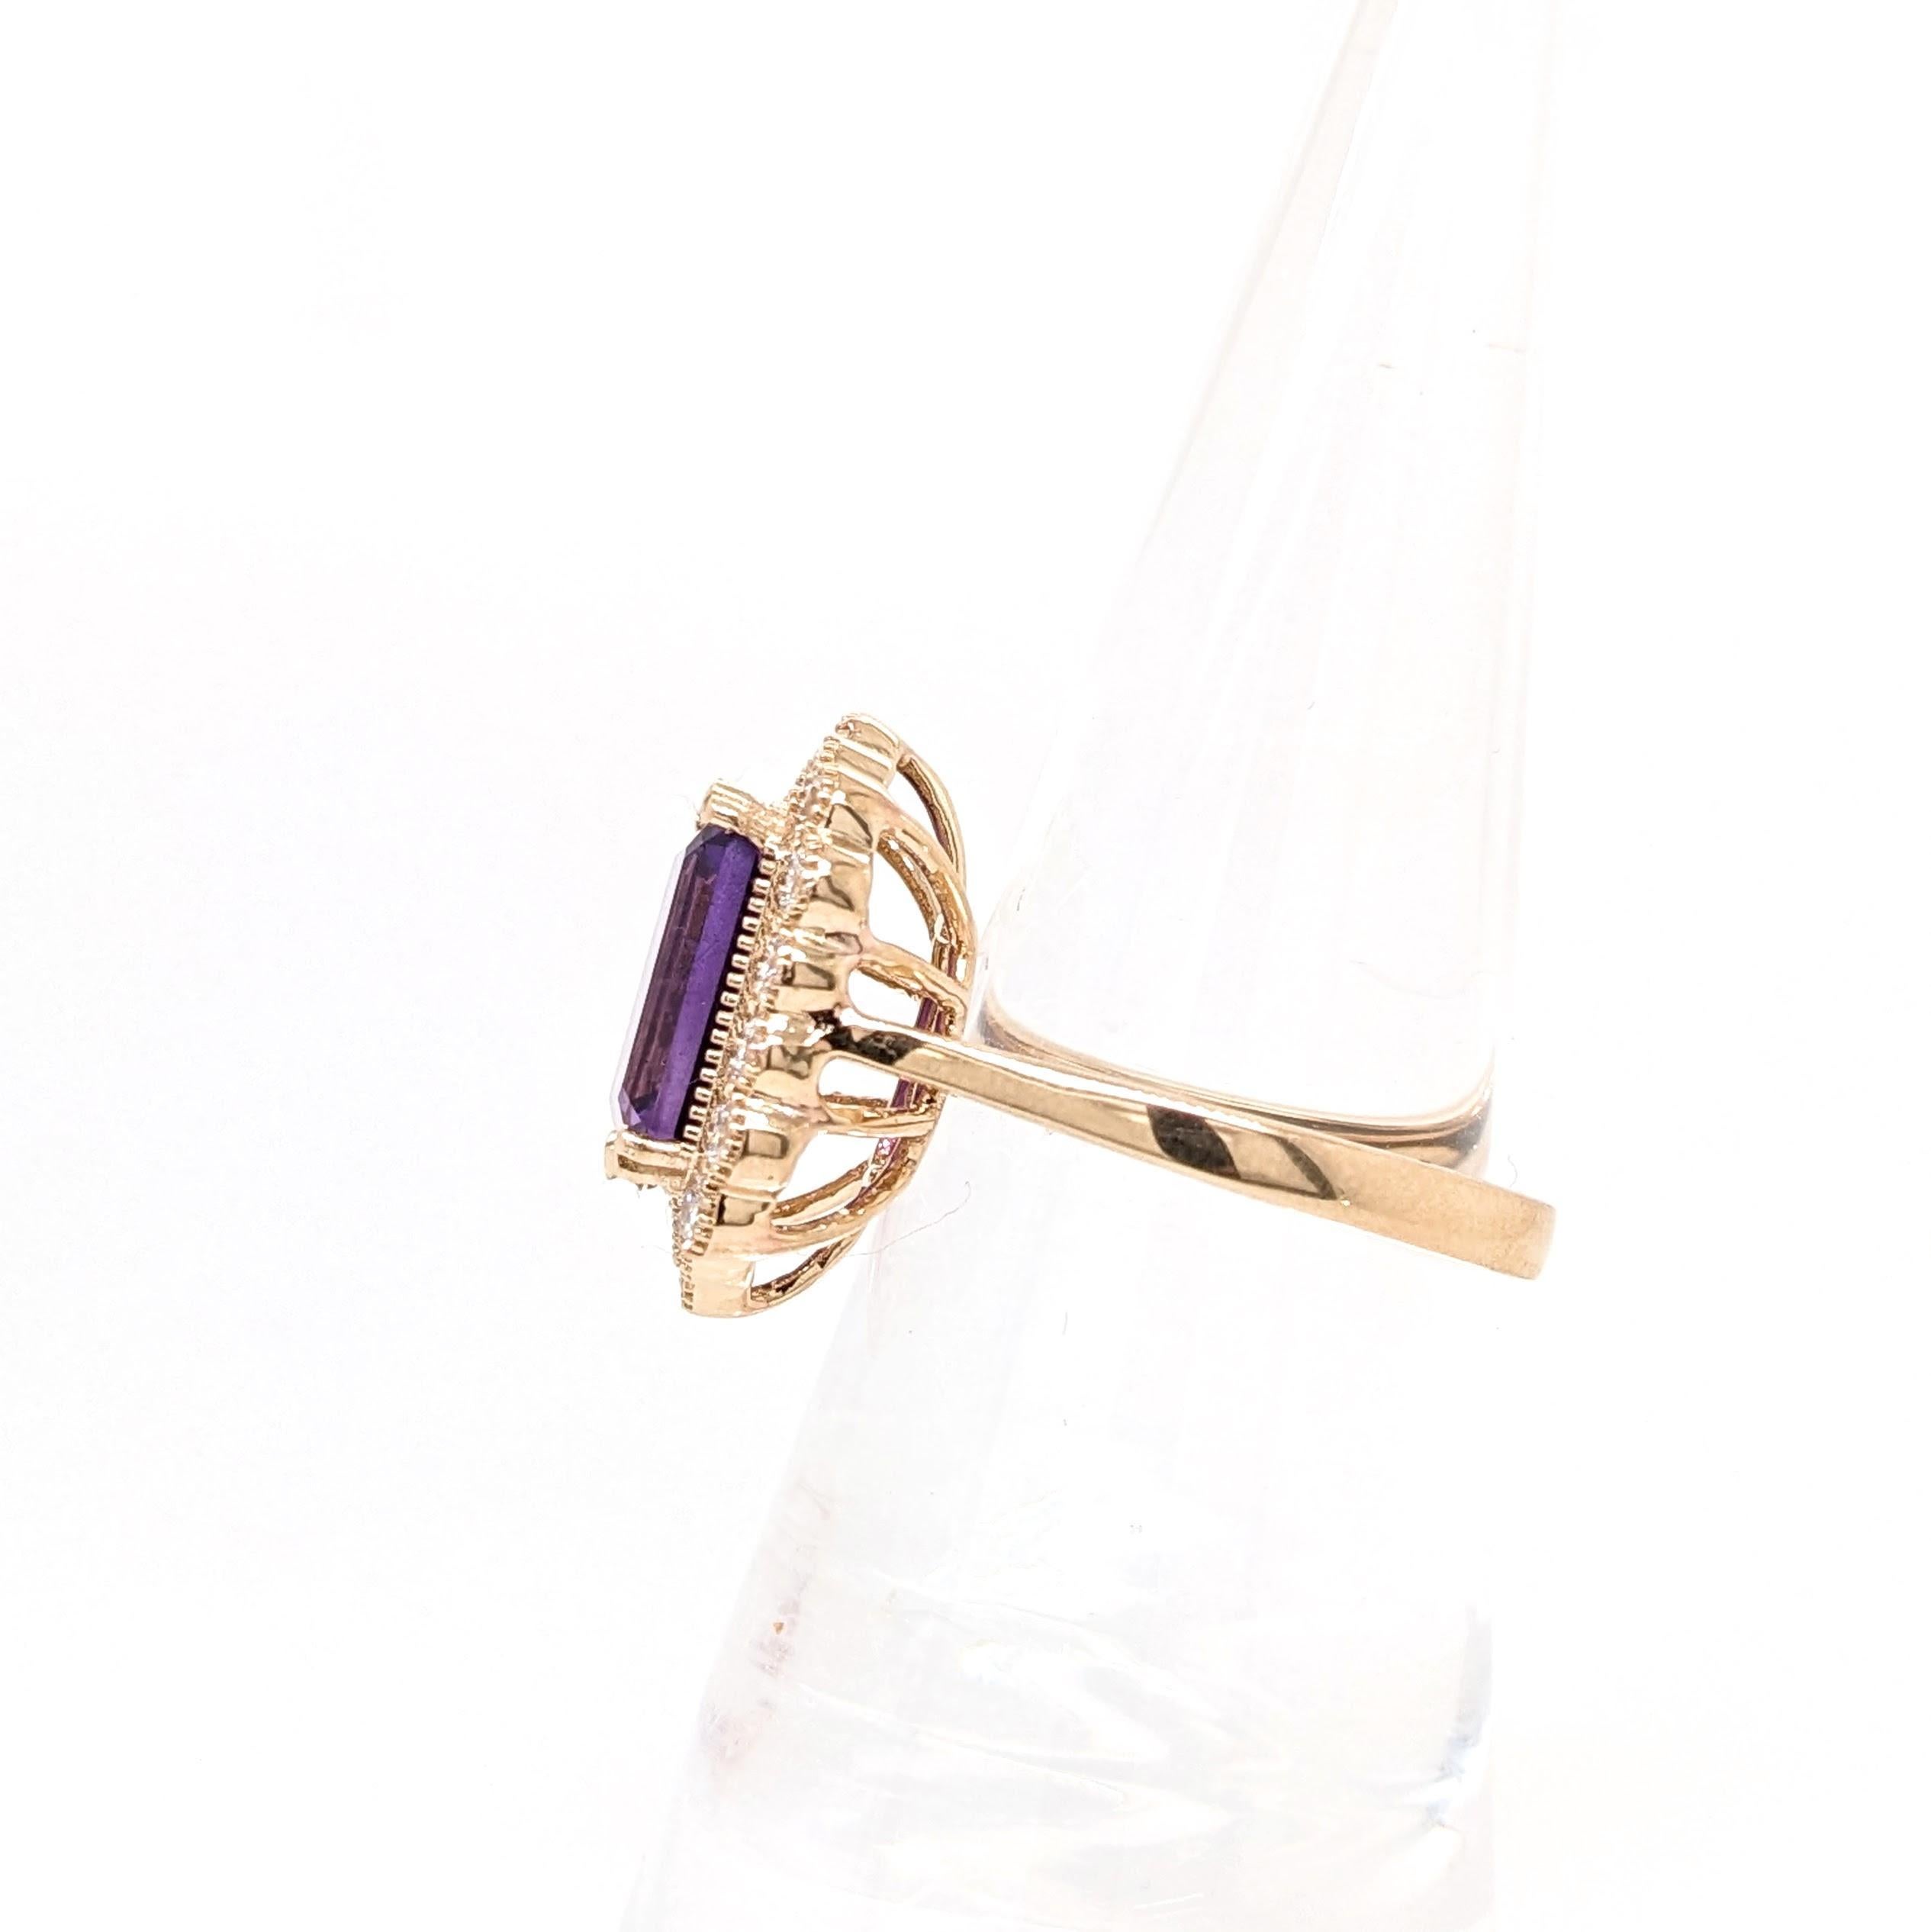 3.1ct Amethyst Ring w Earth Mined Diamonds in Solid 14K Yellow Gold EM 11x8mm For Sale 2